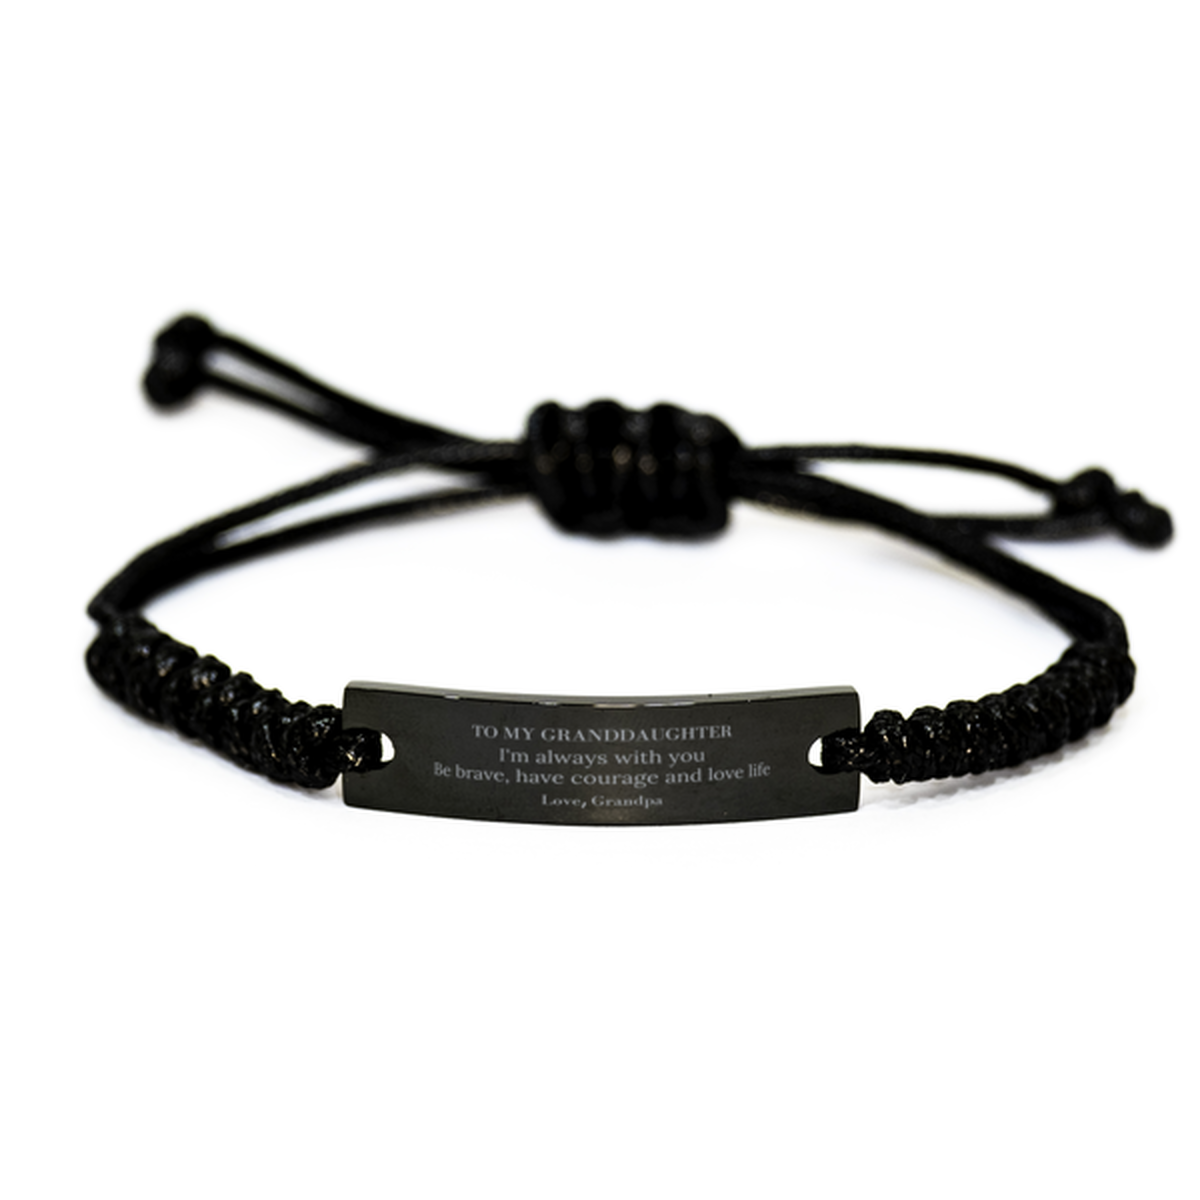 To My Granddaughter Gifts from Grandpa, Unique Black Rope Bracelet Inspirational Christmas Birthday Graduation Gifts for Granddaughter I'm always with you. Be brave, have courage and love life. Love, Grandpa